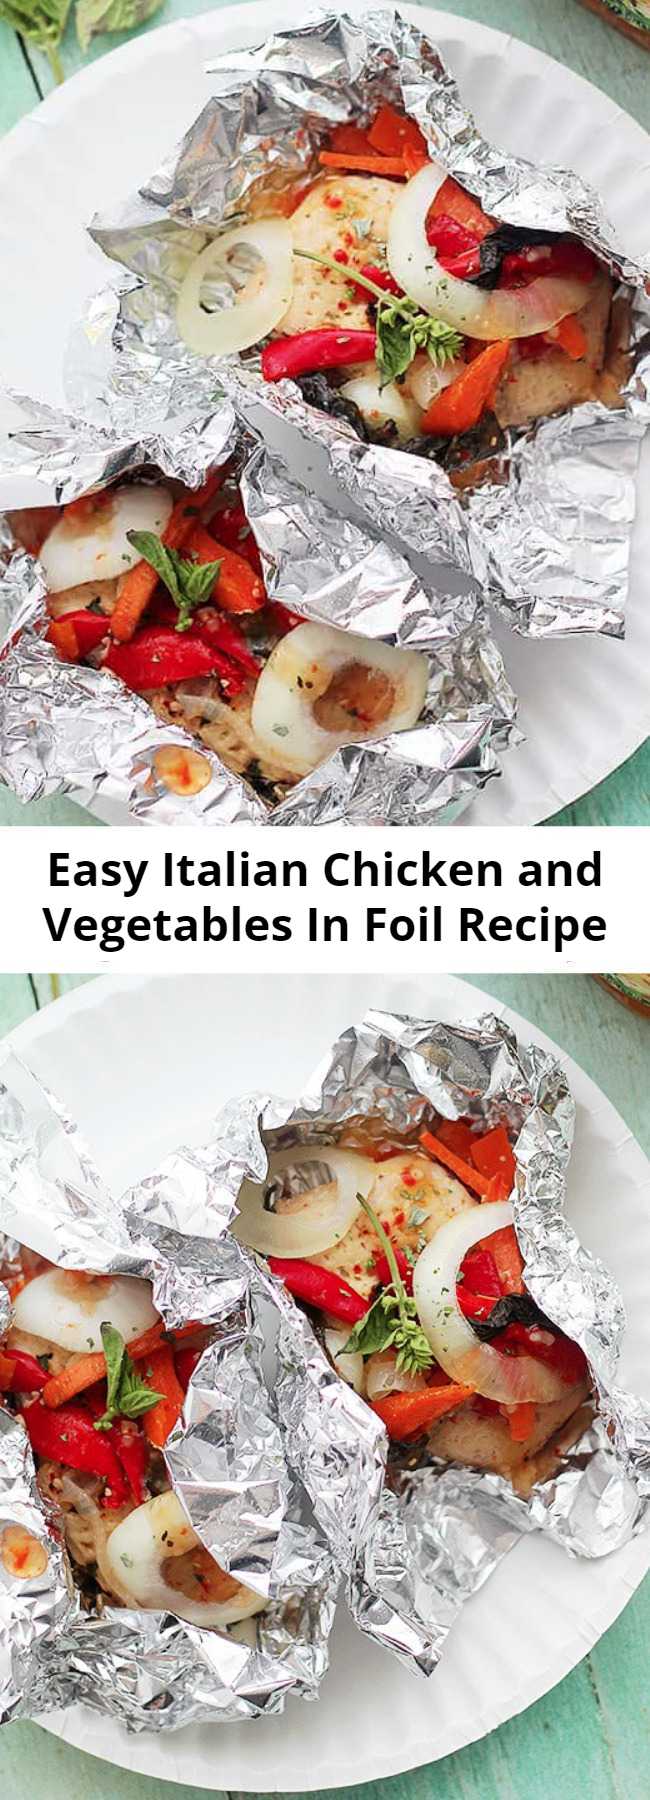 Easy Italian Chicken and Vegetables In Foil Recipe - Italian Chicken and Vegetables In Foil is such an easy & delicious chicken recipe! Flavorful, incredibly moist chicken breasts baked in aluminum foil with peppers, onion, garlic, fresh herbs and Italian Dressing. #chickenbreasts #foildinner